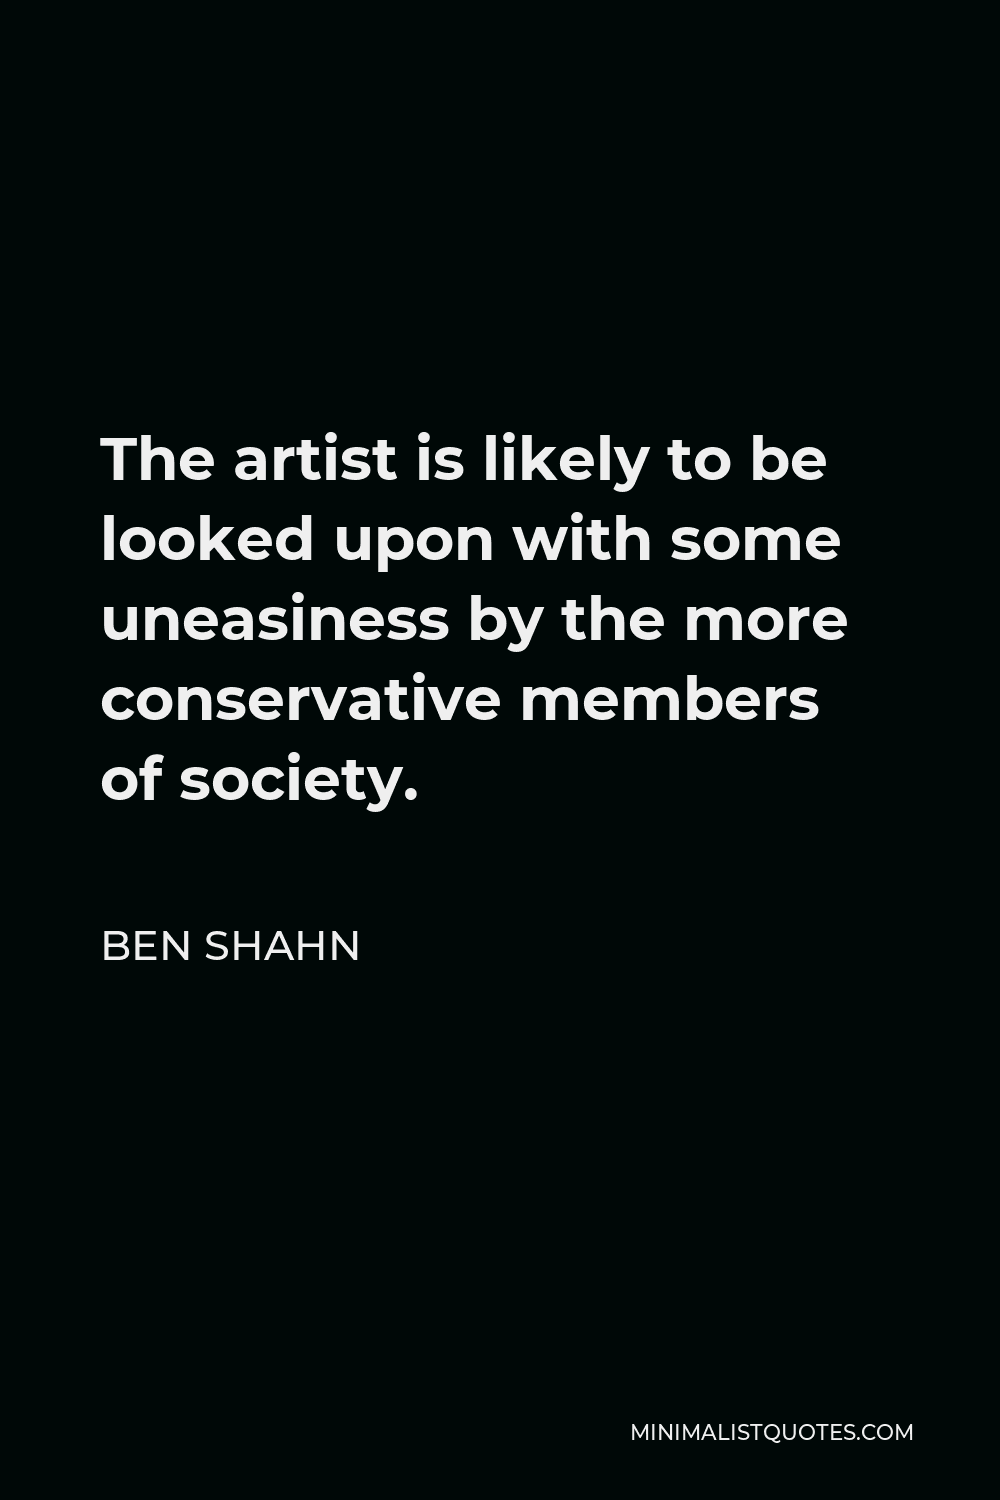 Ben Shahn Quote - The artist is likely to be looked upon with some uneasiness by the more conservative members of society.